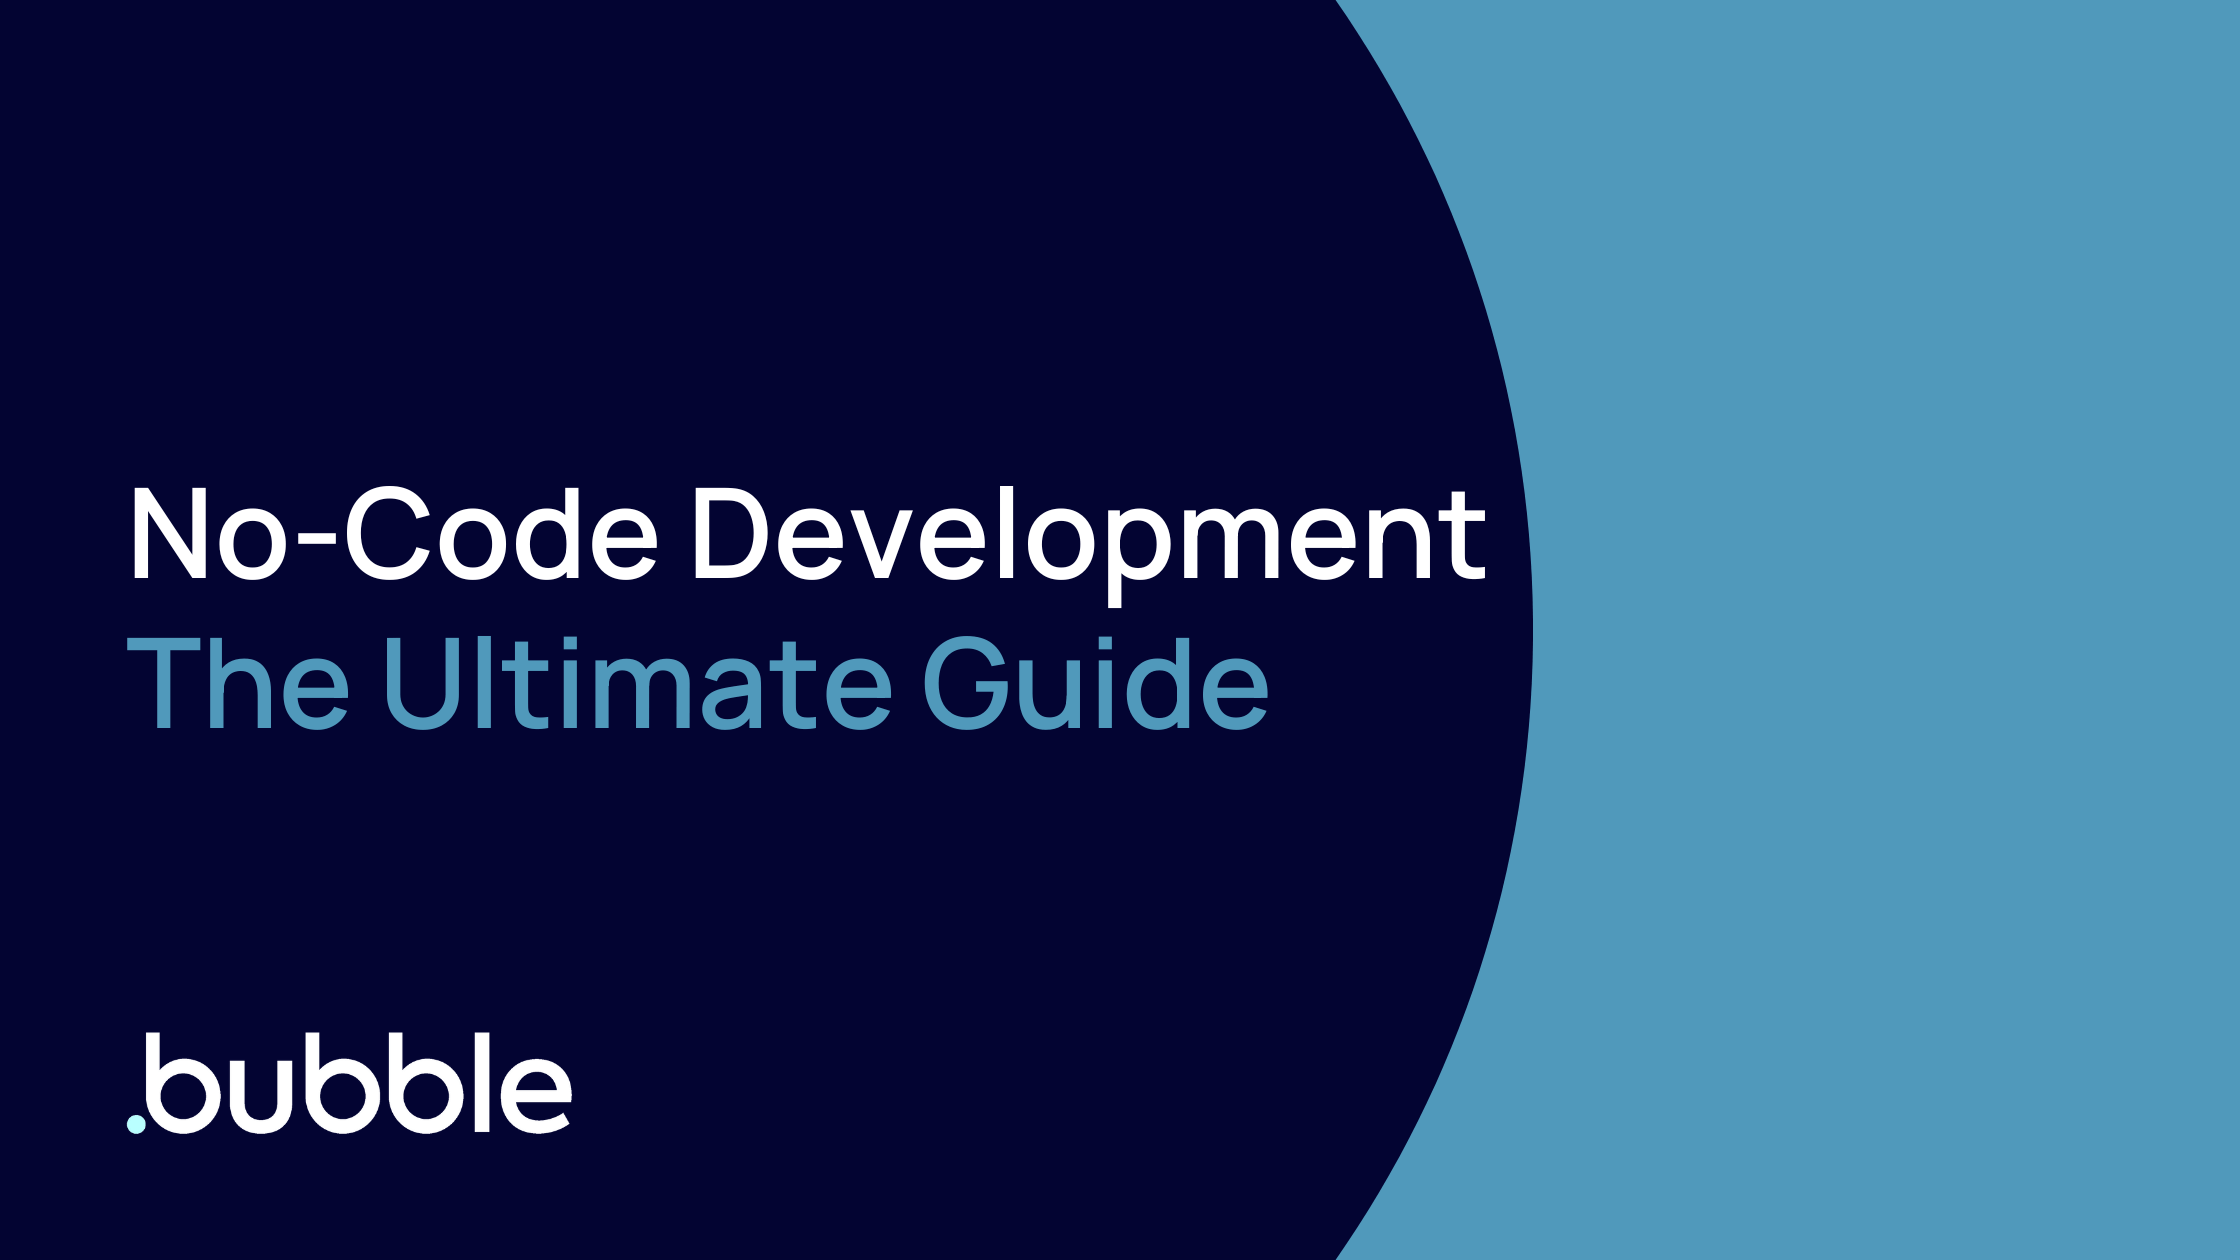 The Ultimate Guide to No-Code Development (2023 Edition)